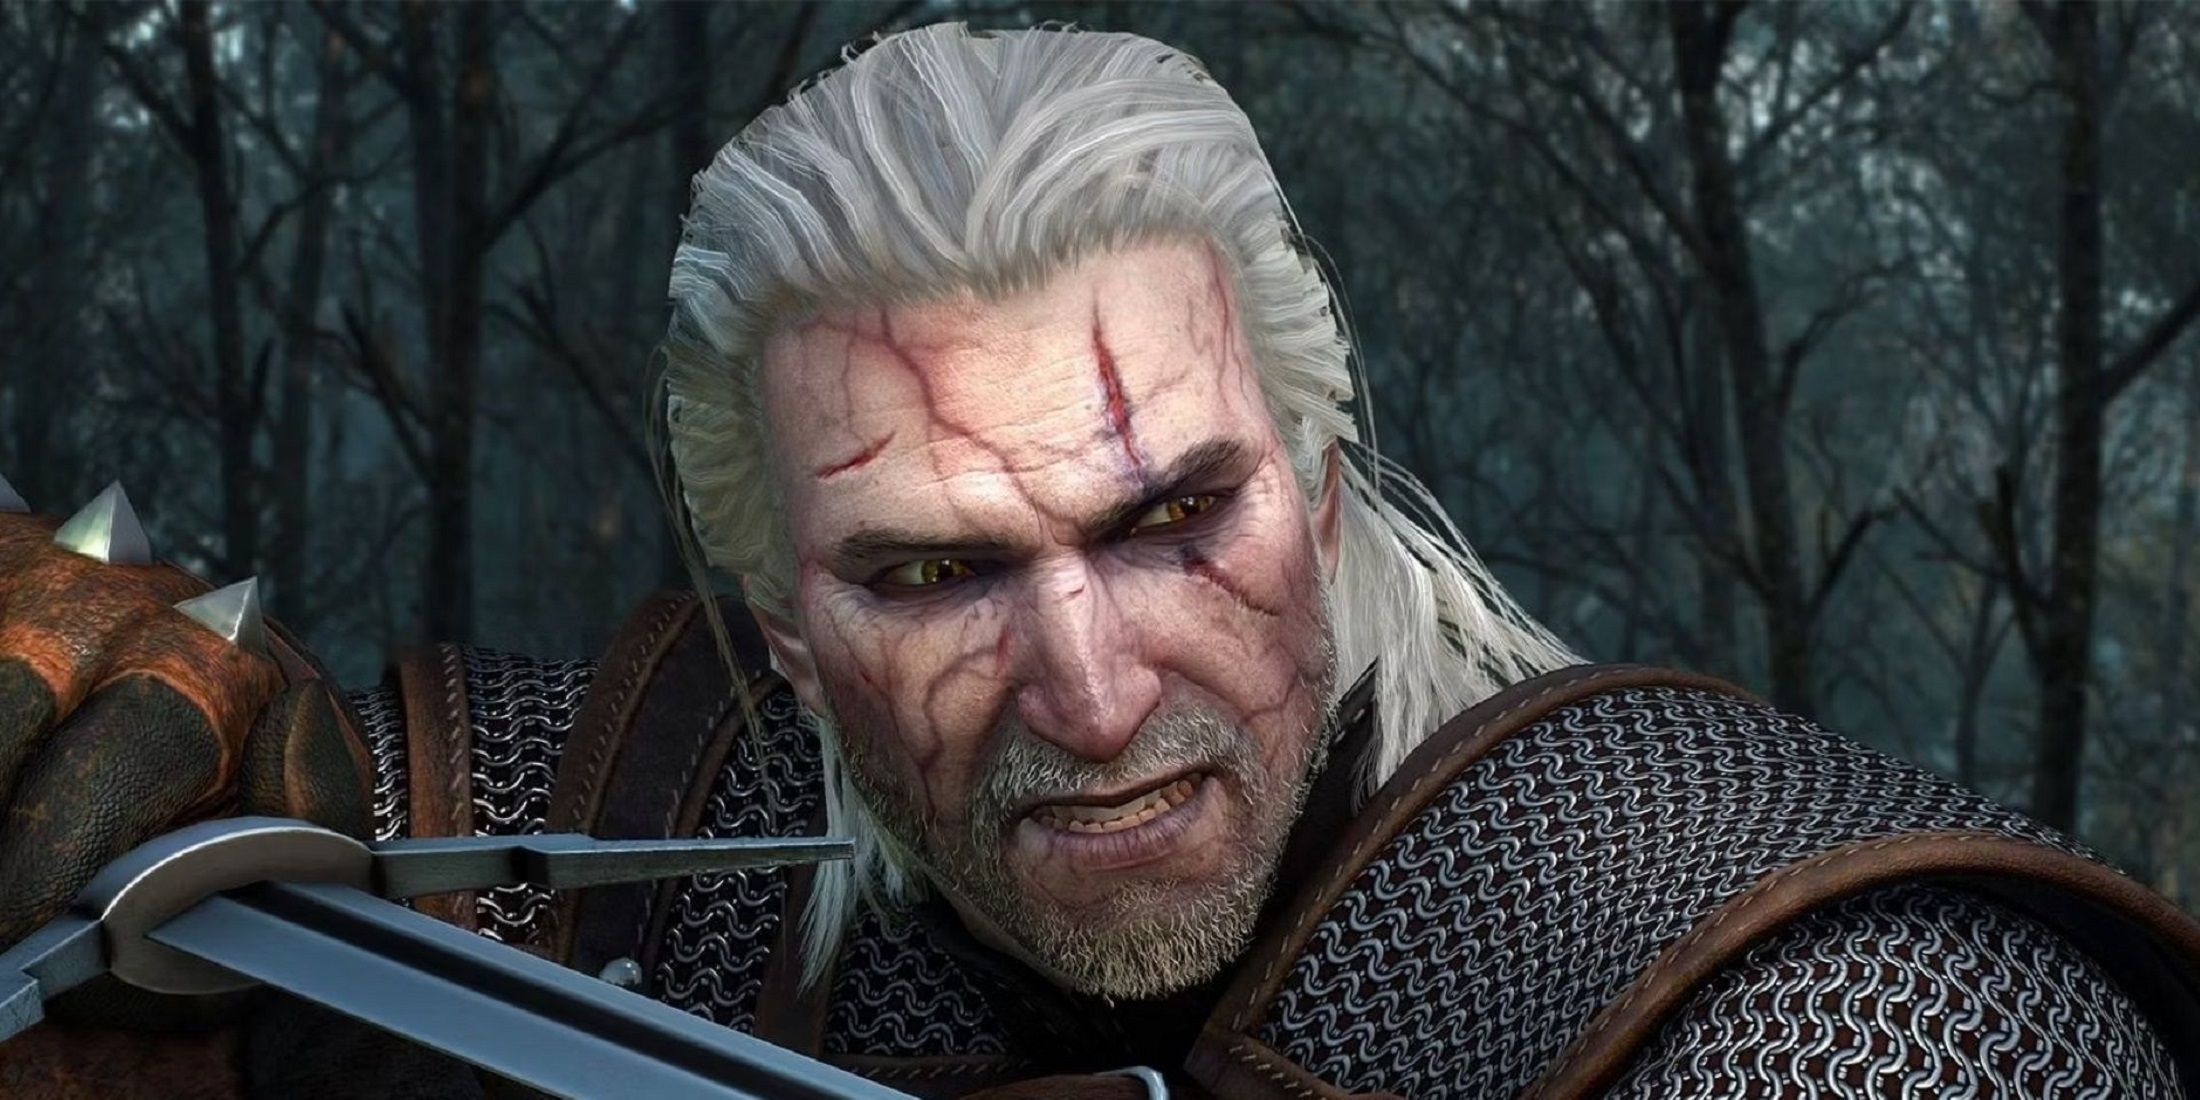 Image of Geralt pointing a sword in The Witcher